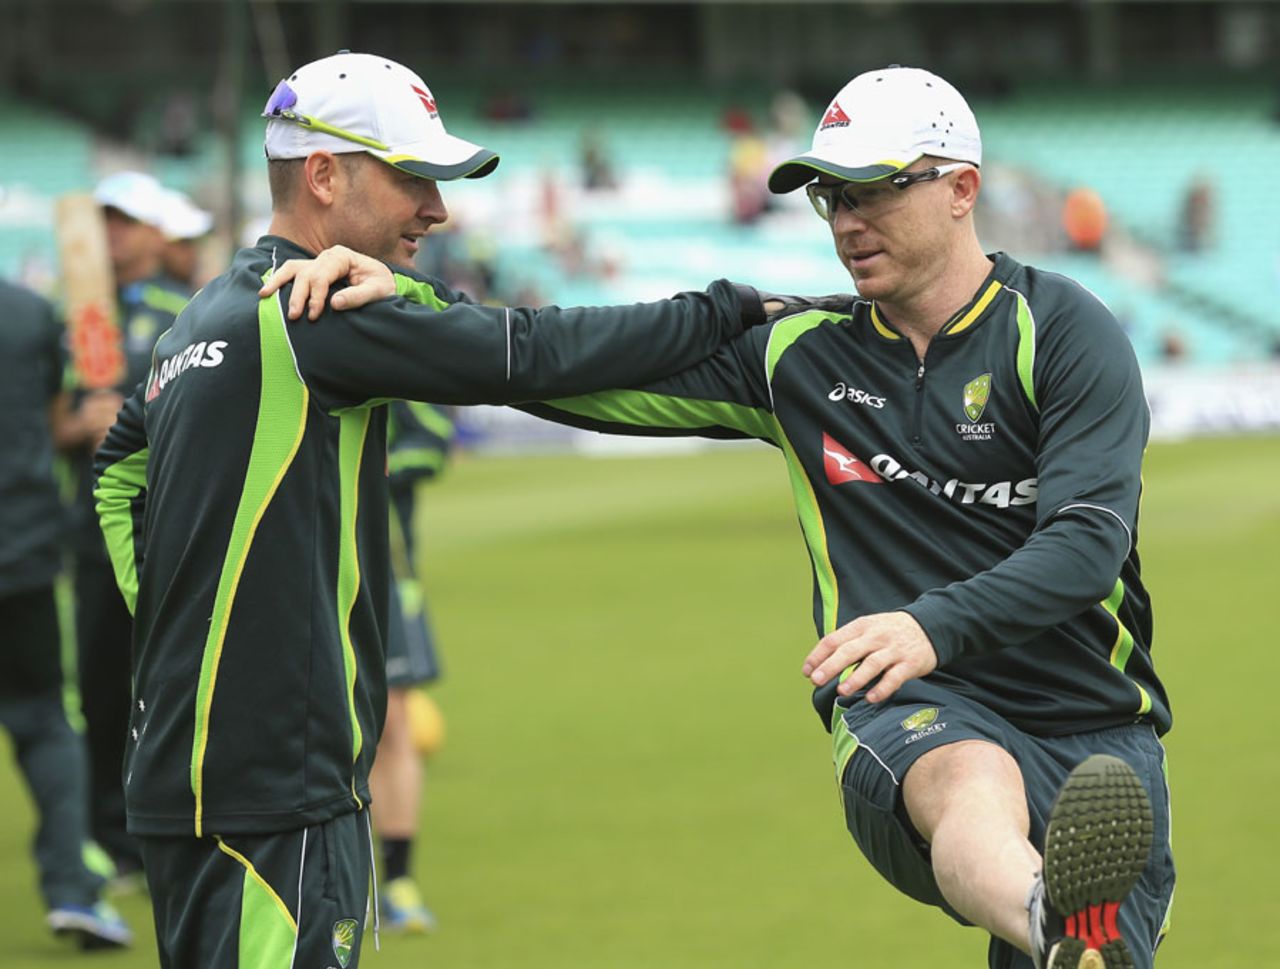 Michael Clarke and Chris Rogers were signing off together, England v Australia, 5th Investec Ashes Test, The Oval, August 20, 2015